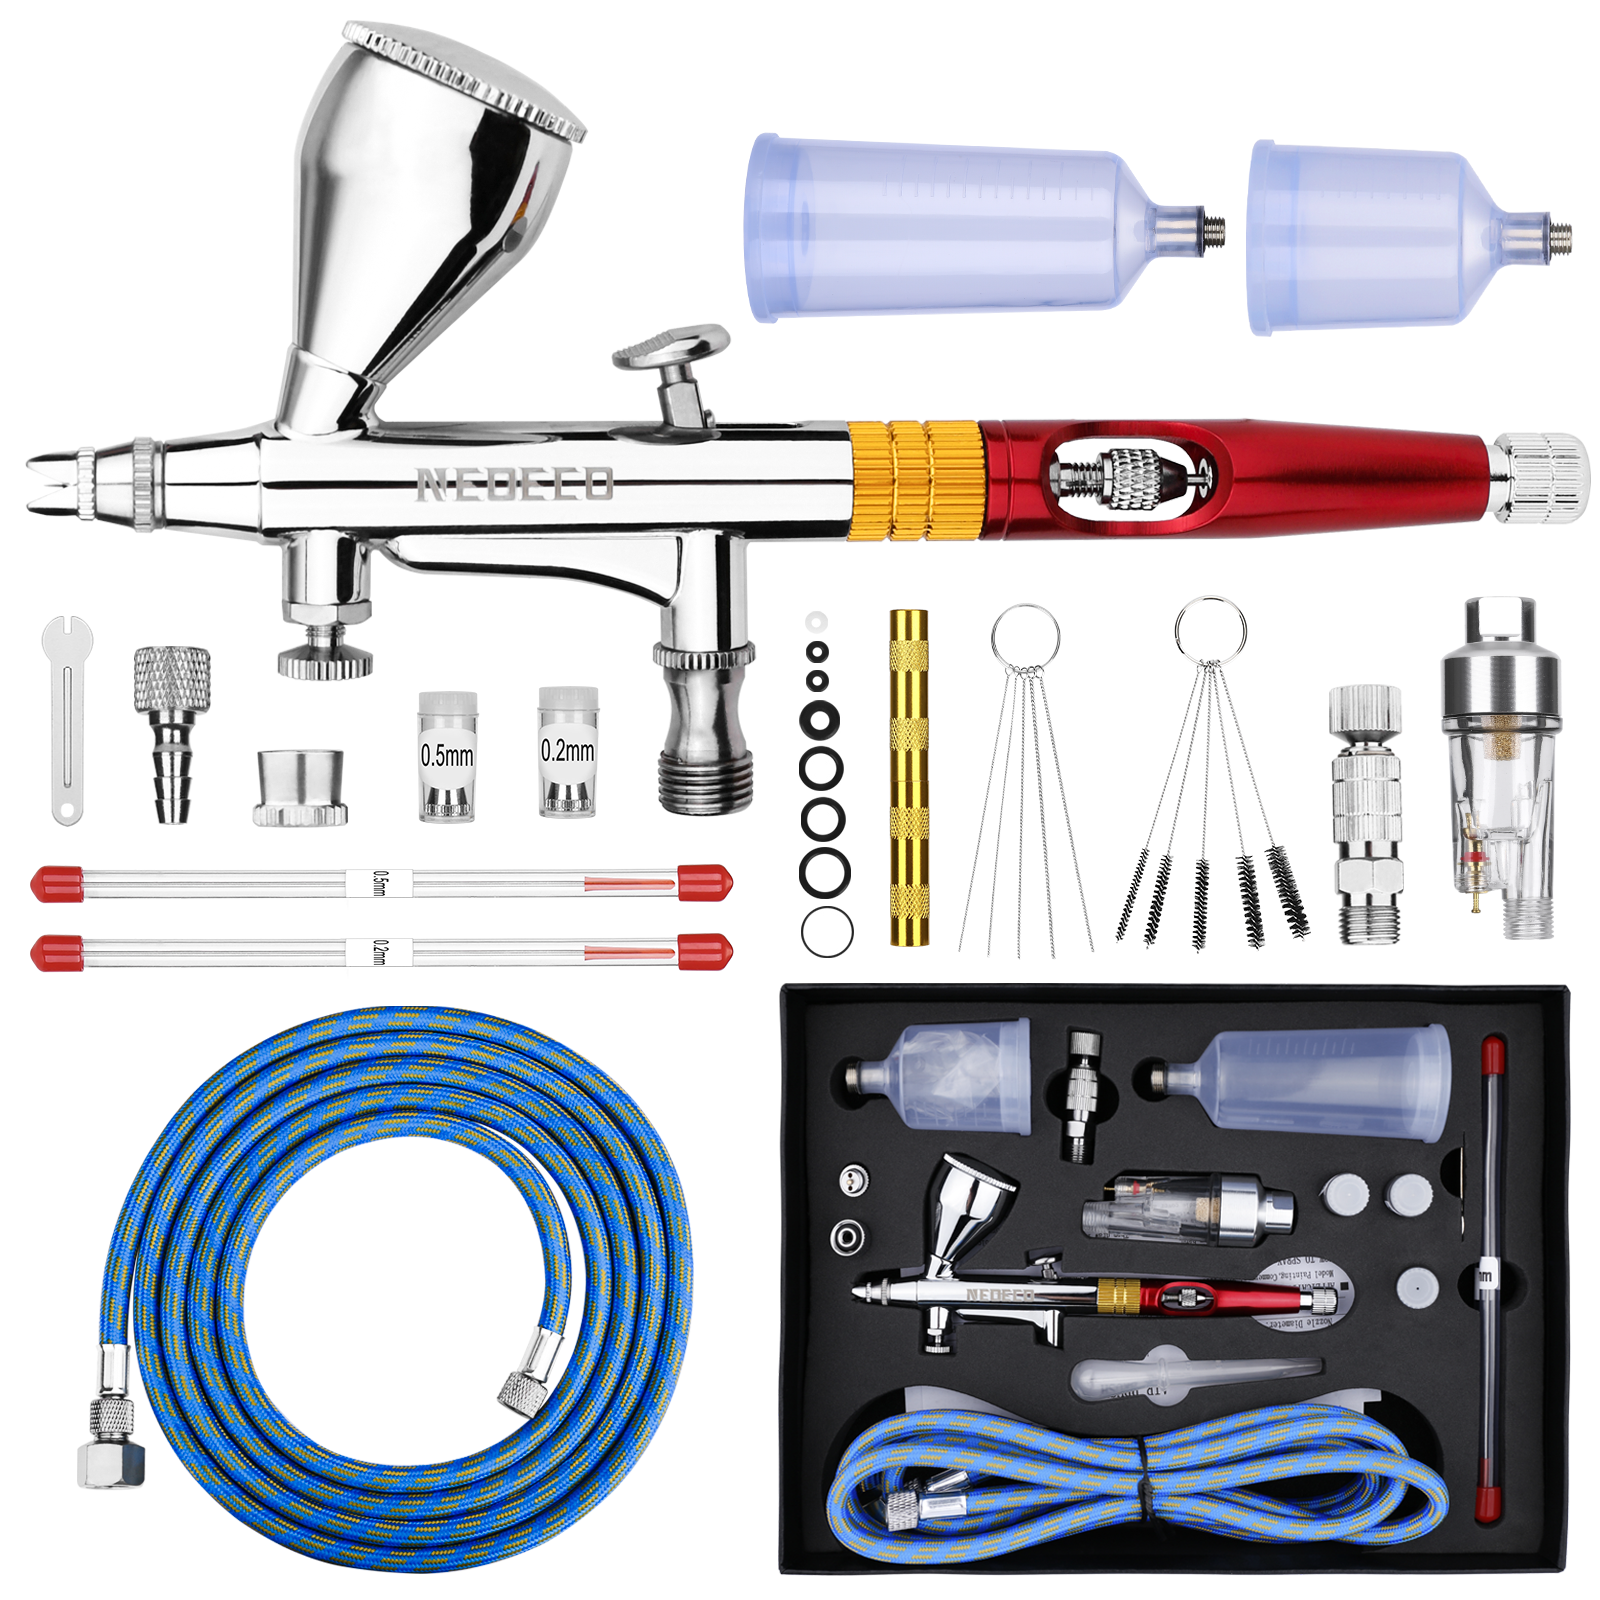 We've found the Best Dual-Action Gravity Feed Airbrush Kit –